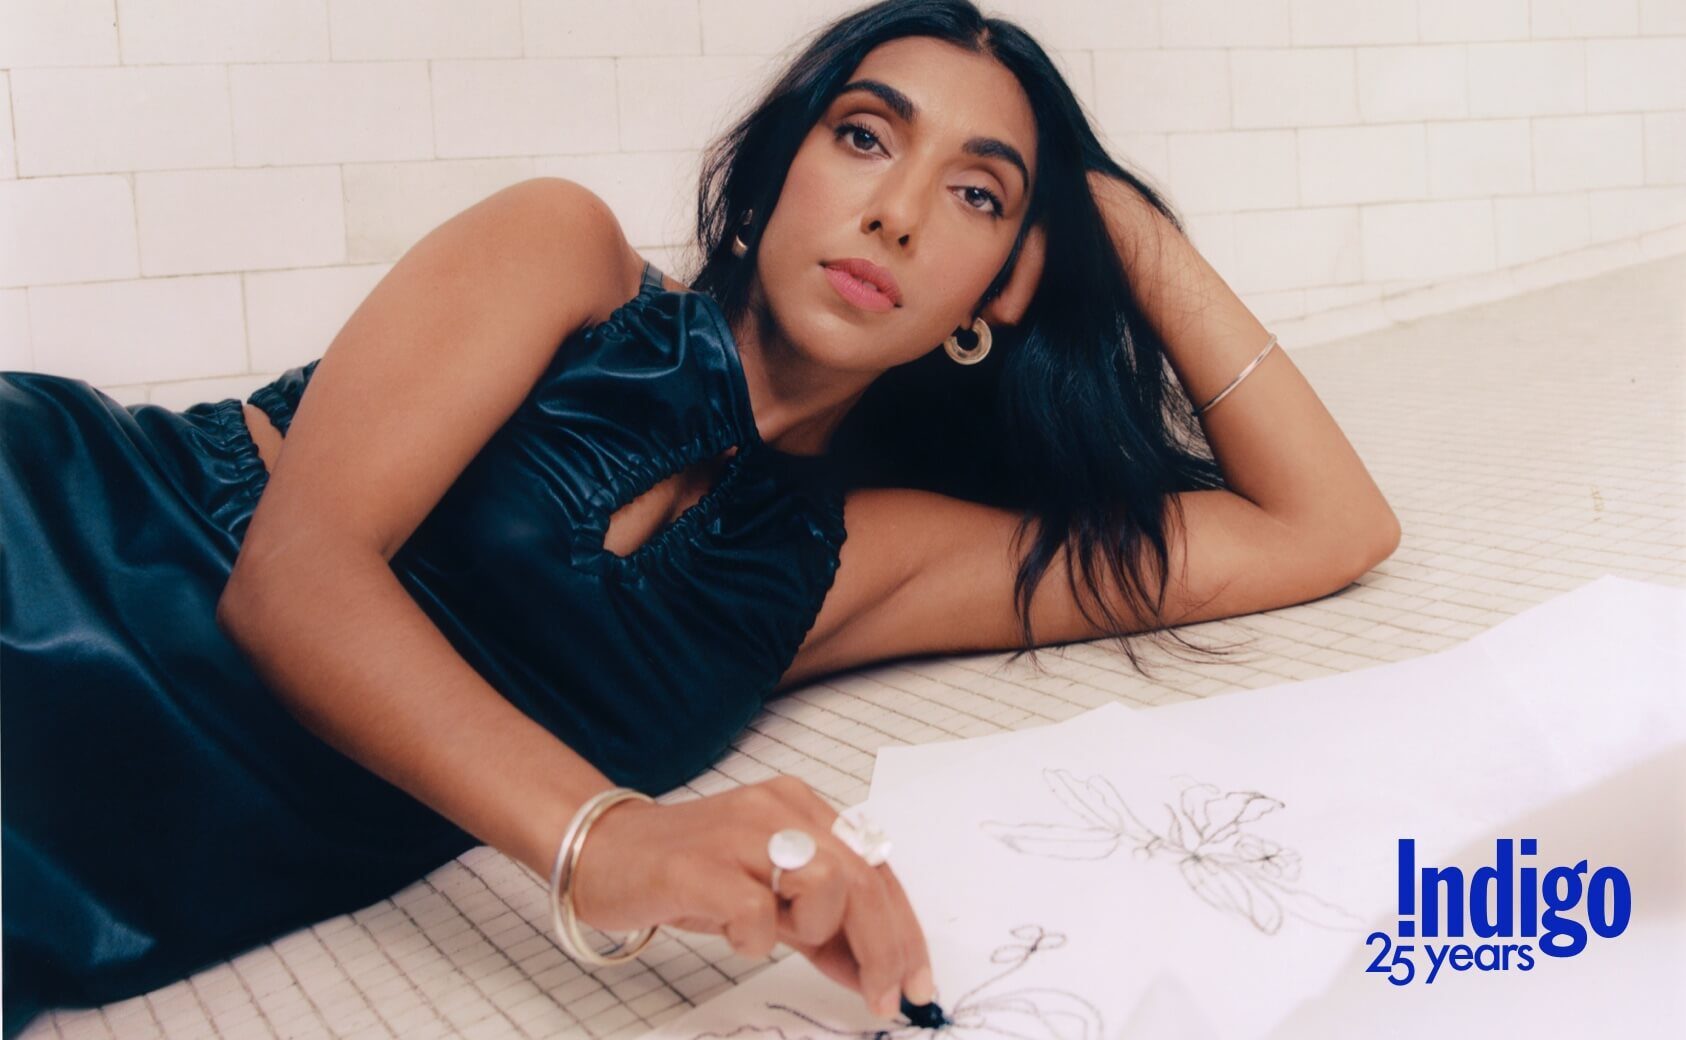 Poet. Activist. Artist. To celebrate 25 years of Indigo, we spoke with bestselling poet Rupi Kaur to find out how she lives her life, on purpose.